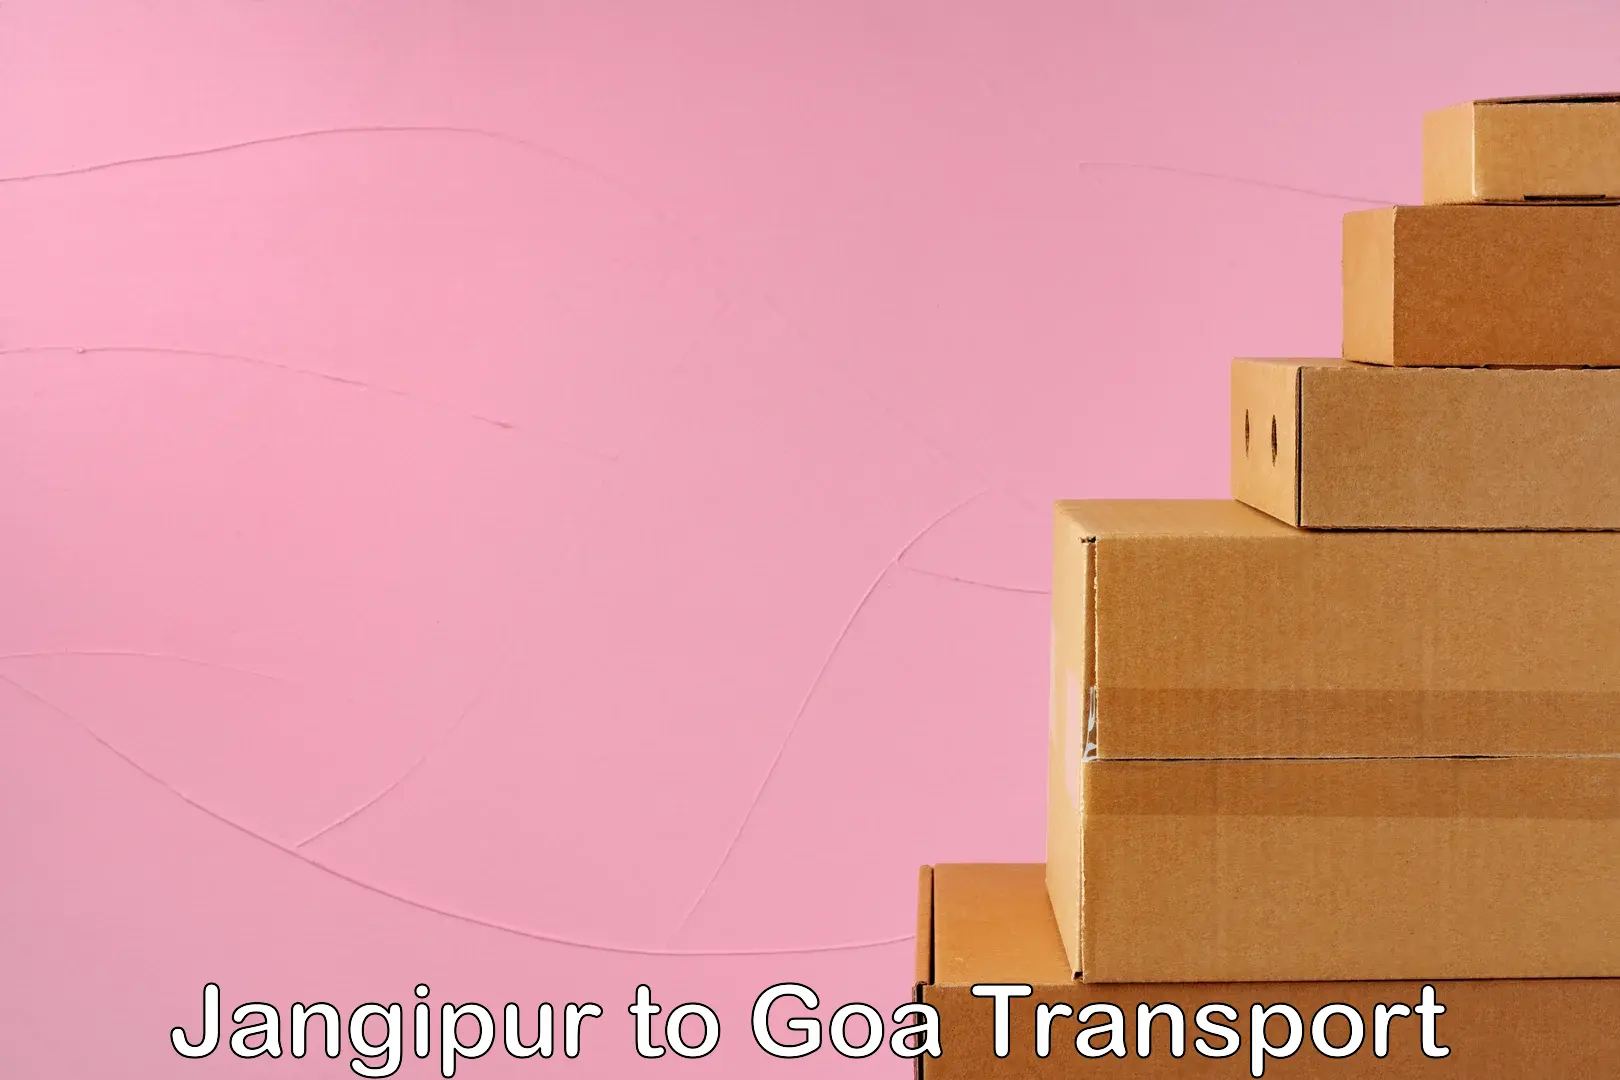 Transport bike from one state to another Jangipur to Goa